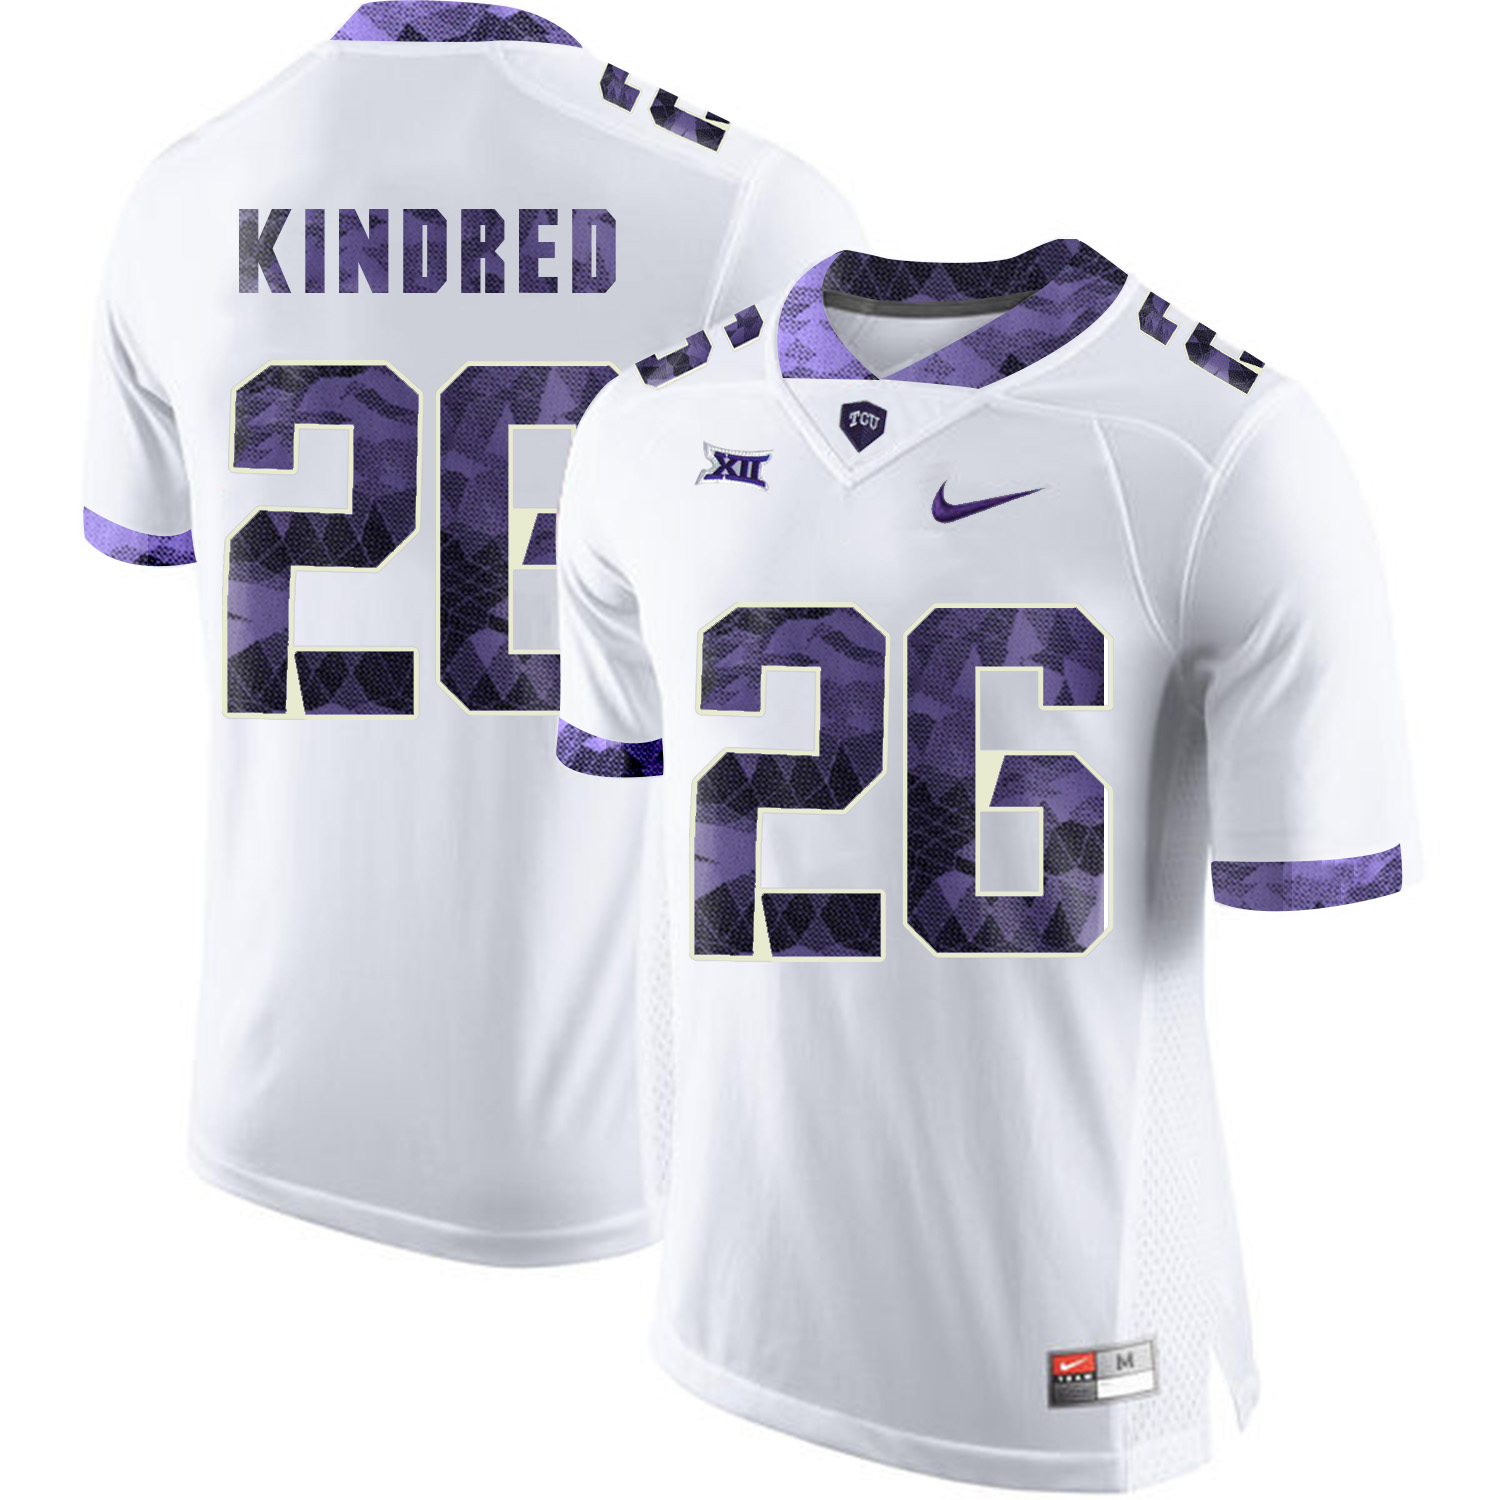 TCU Horned Frogs 26 Derrick Kindred White Print College Football Limited Jersey